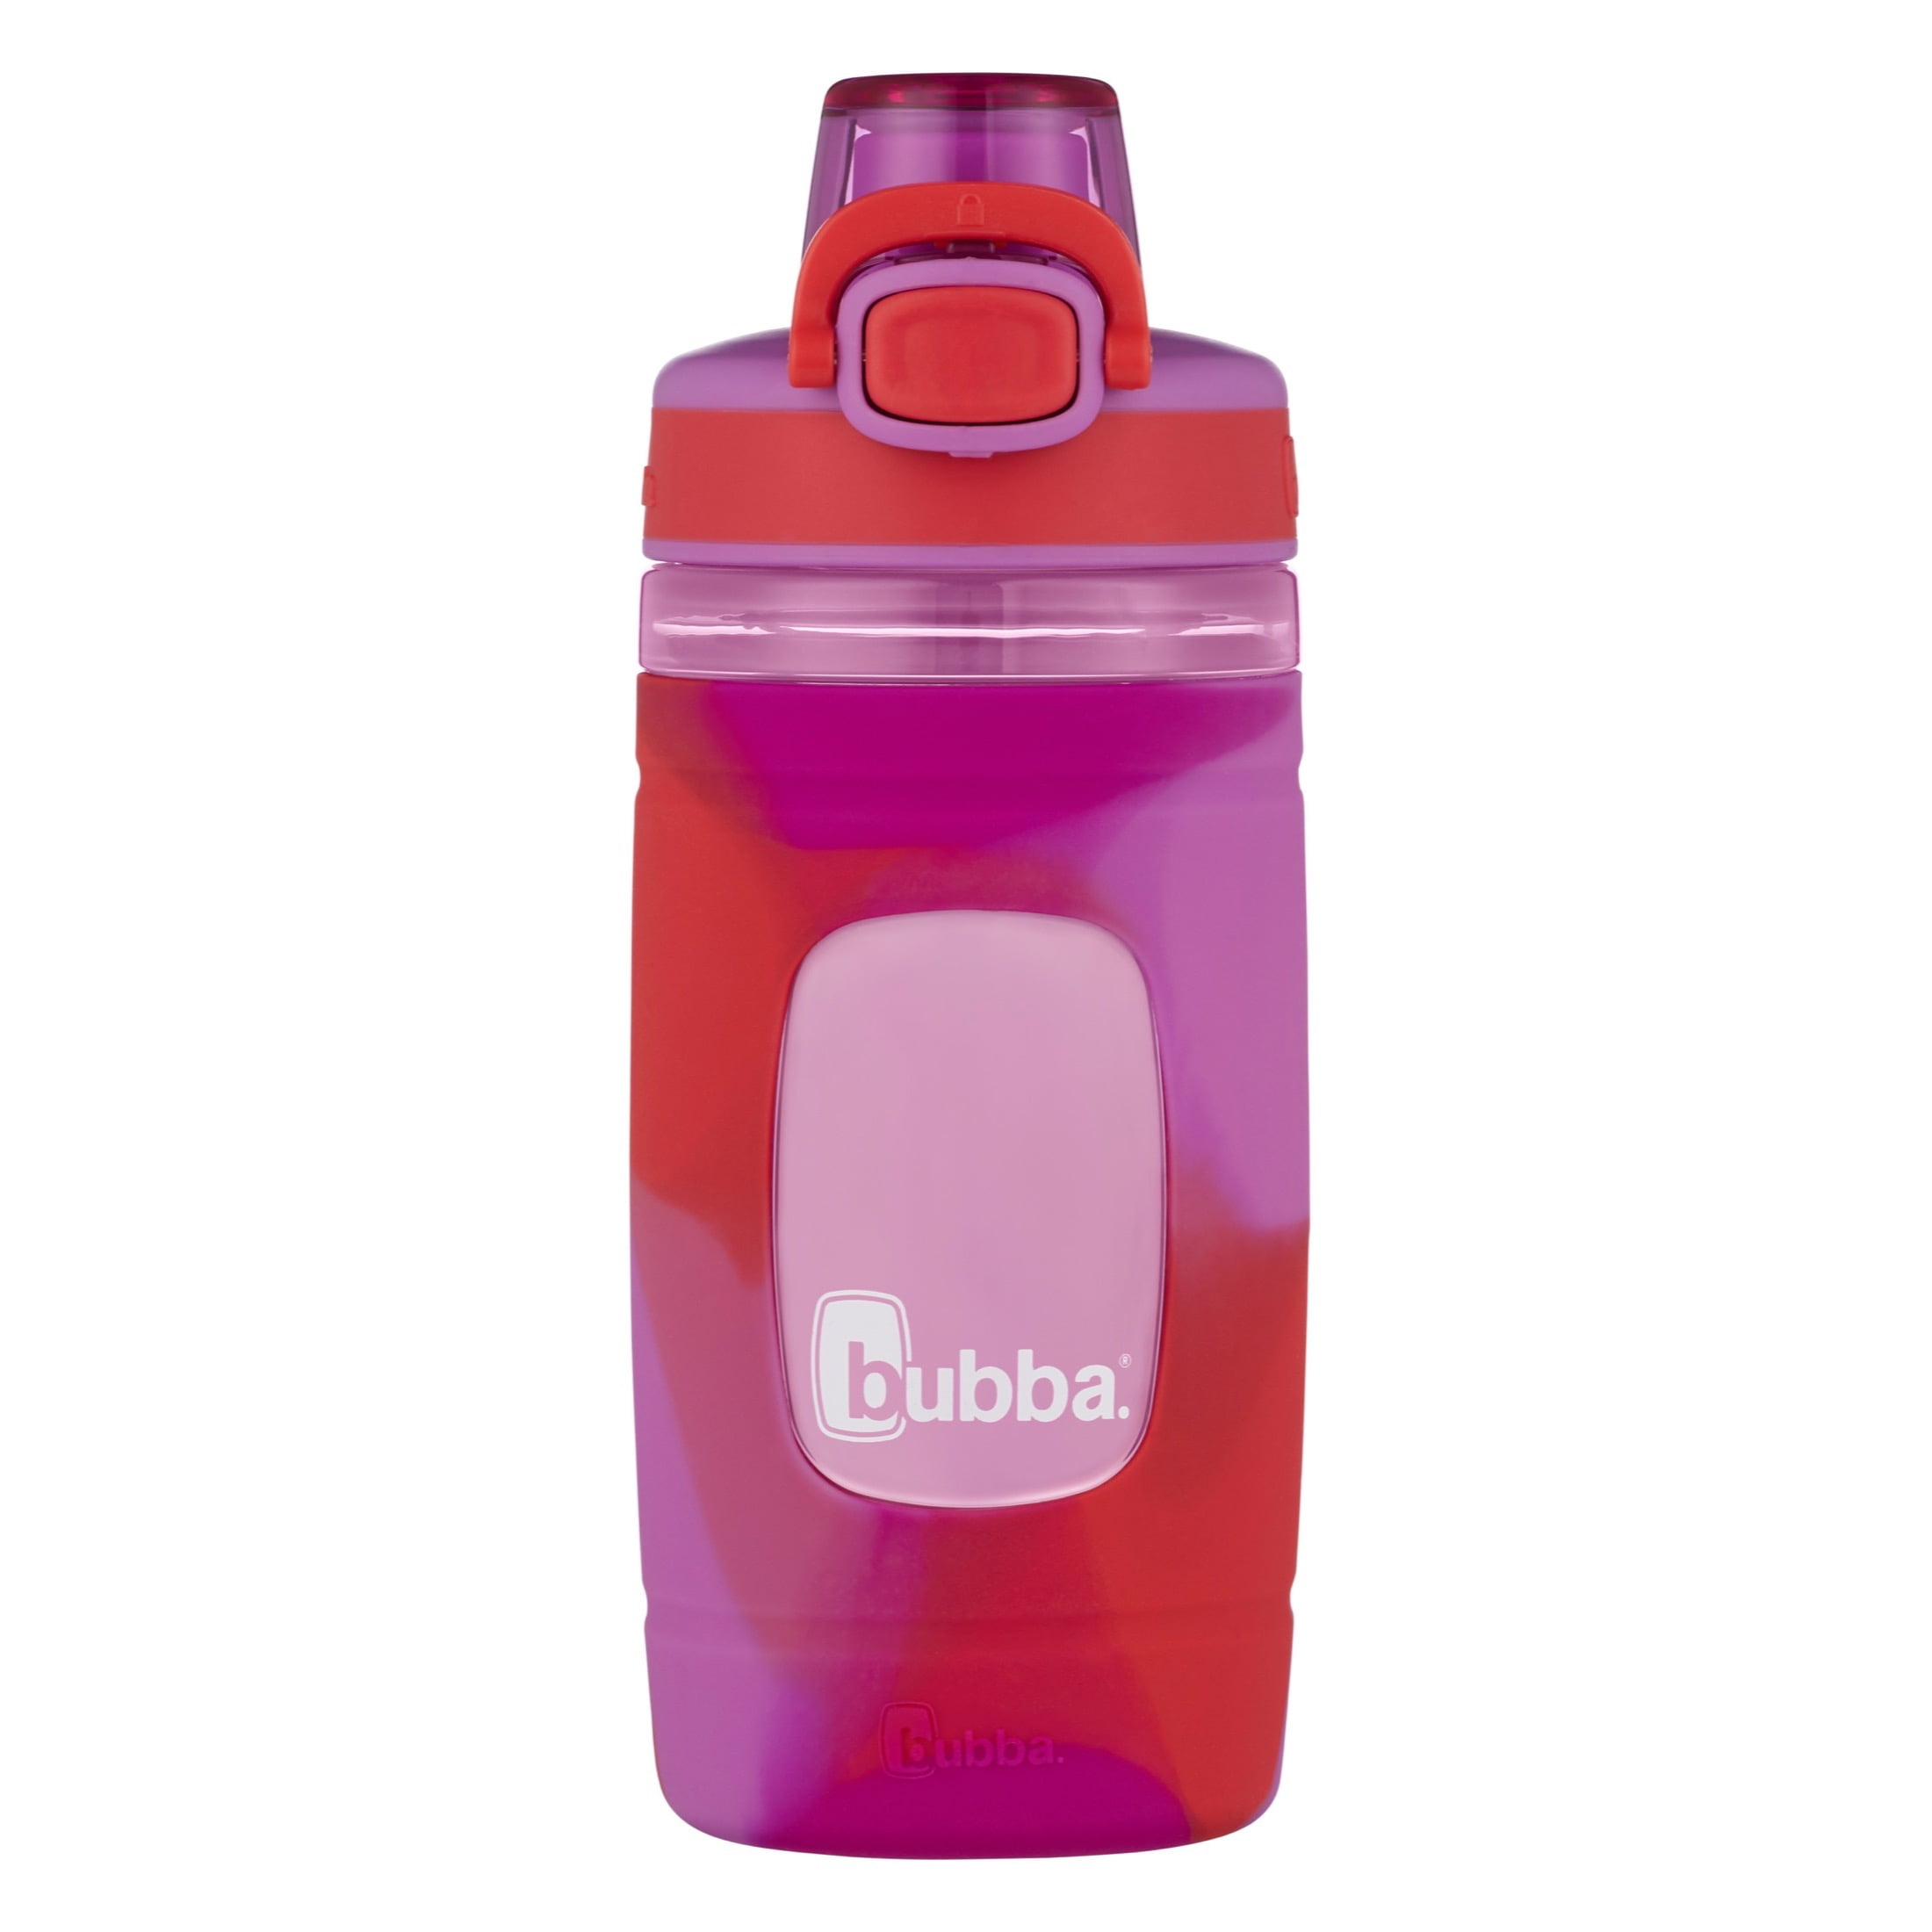 Bubba Flo Kids 16 oz Mixed Berry and Watermelon Plastic Water Bottle with Wide Mouth Lid